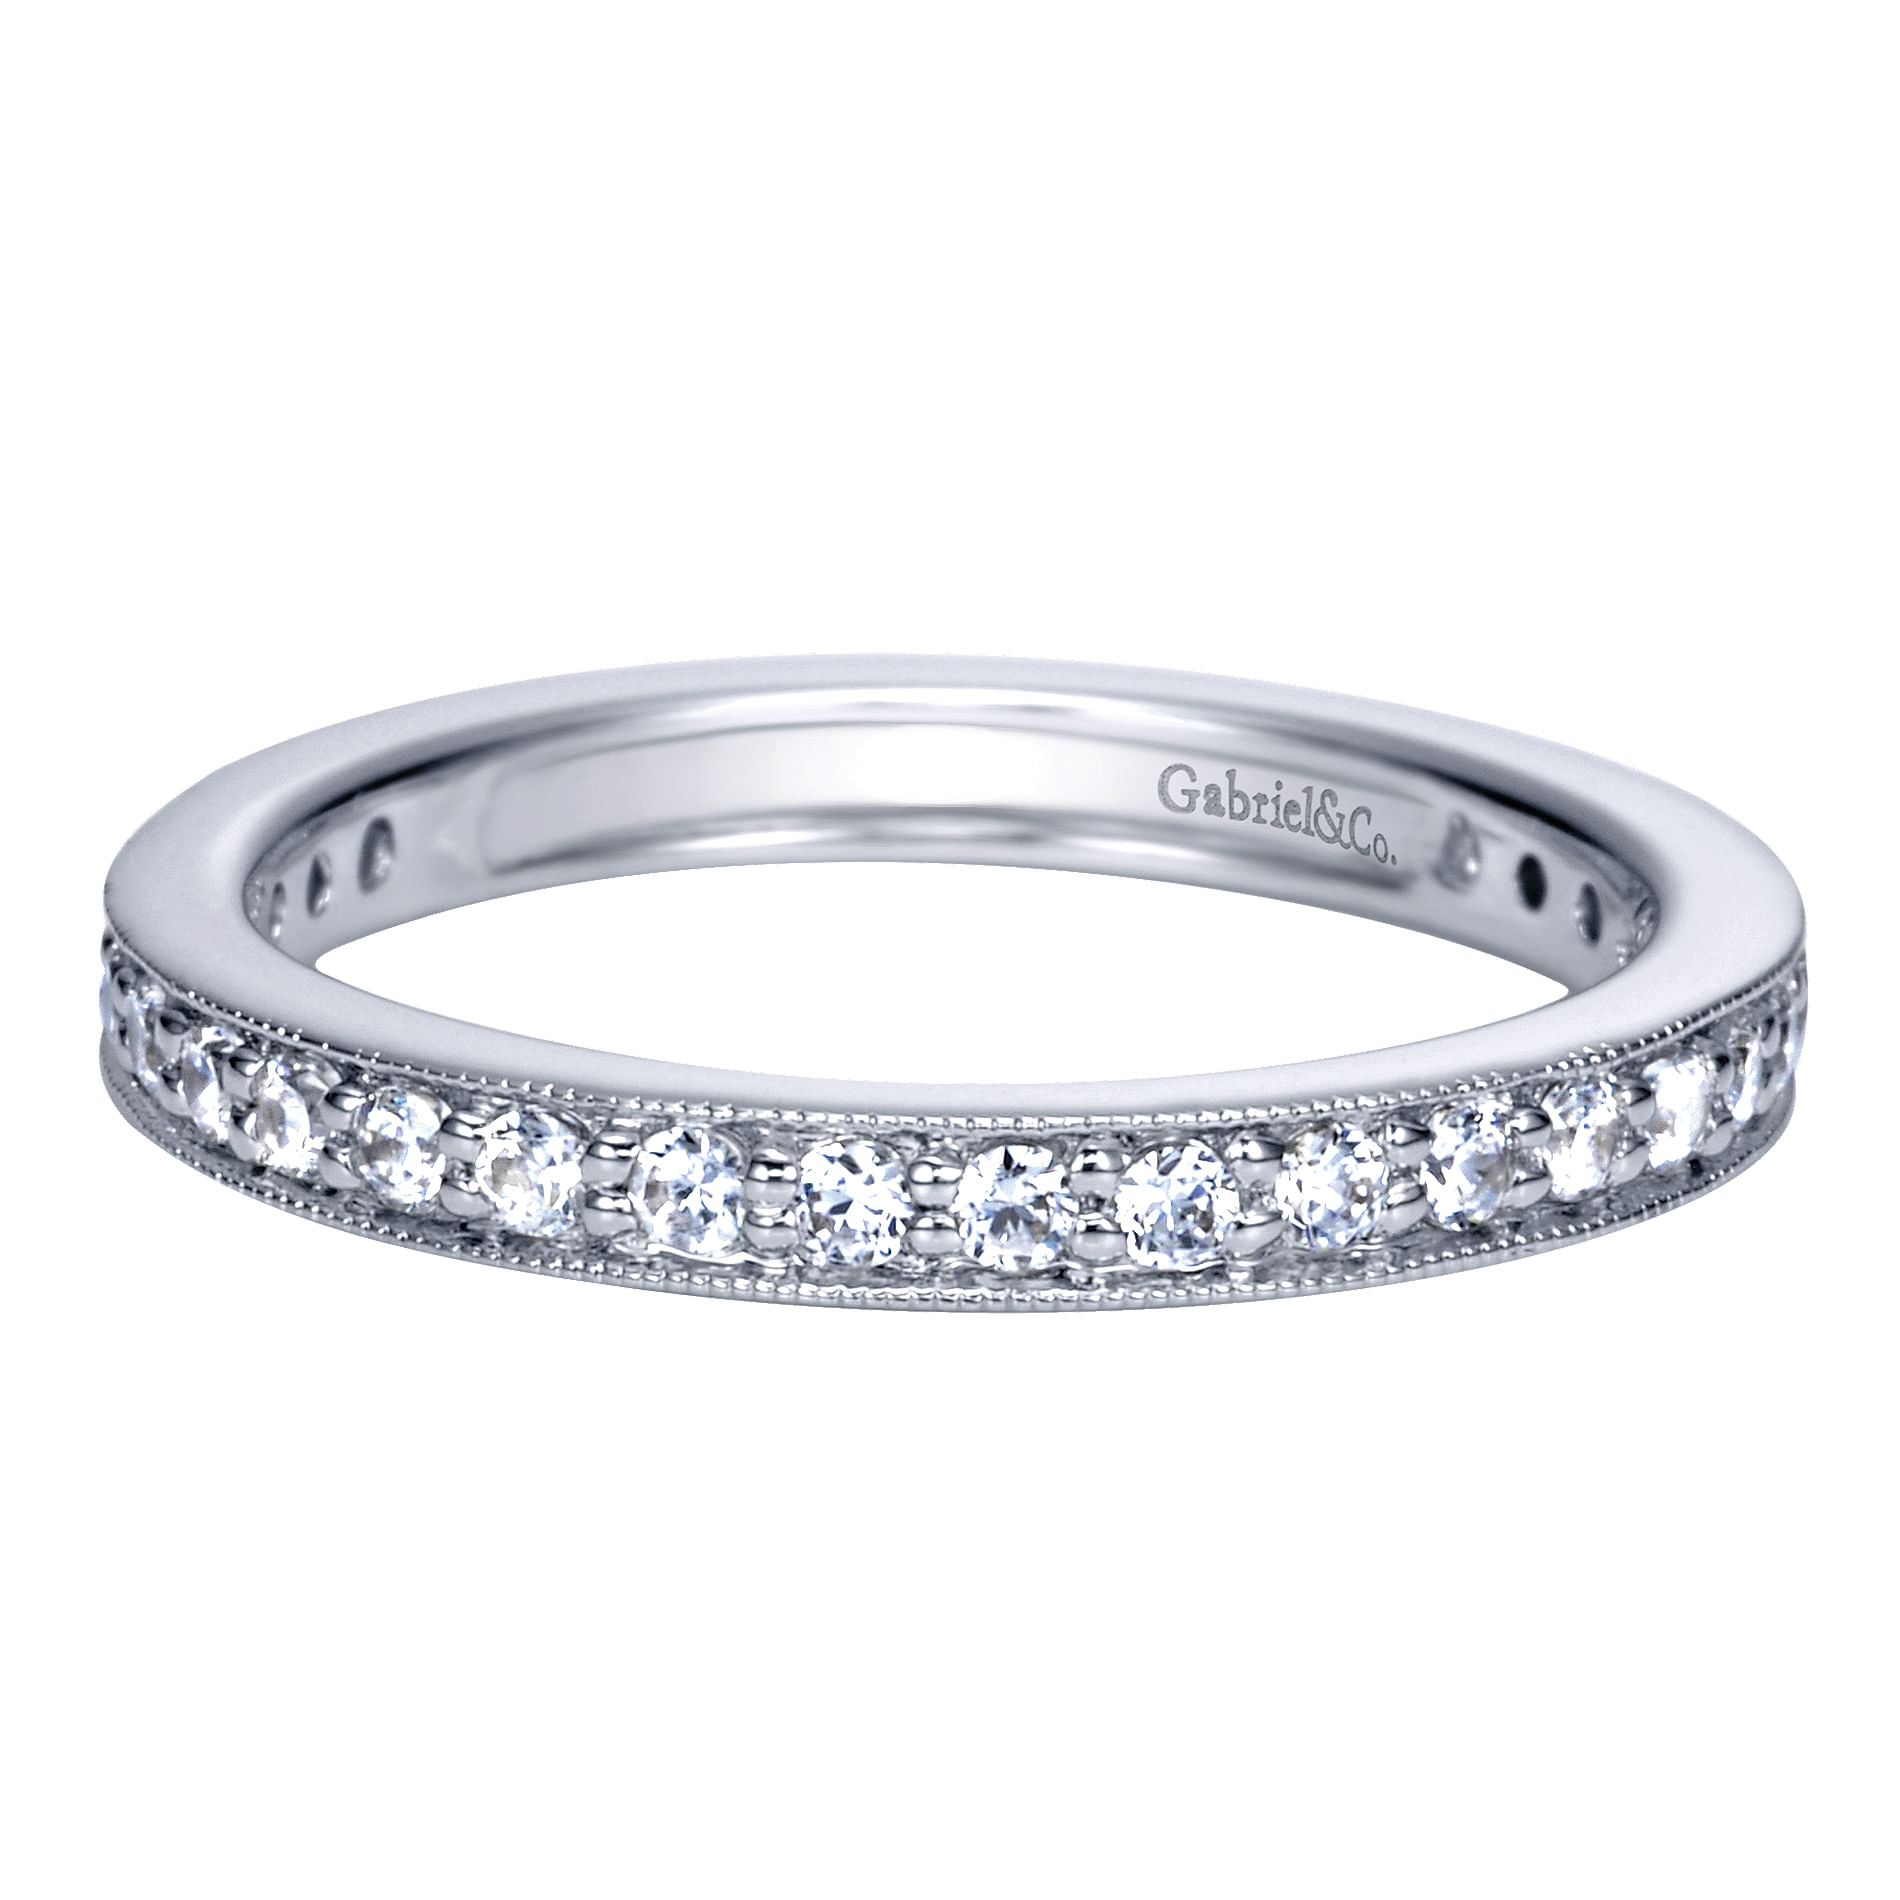 Calabria - Vintage Inspired 14K White Gold Channel Prong Set Diamond Eternity Band